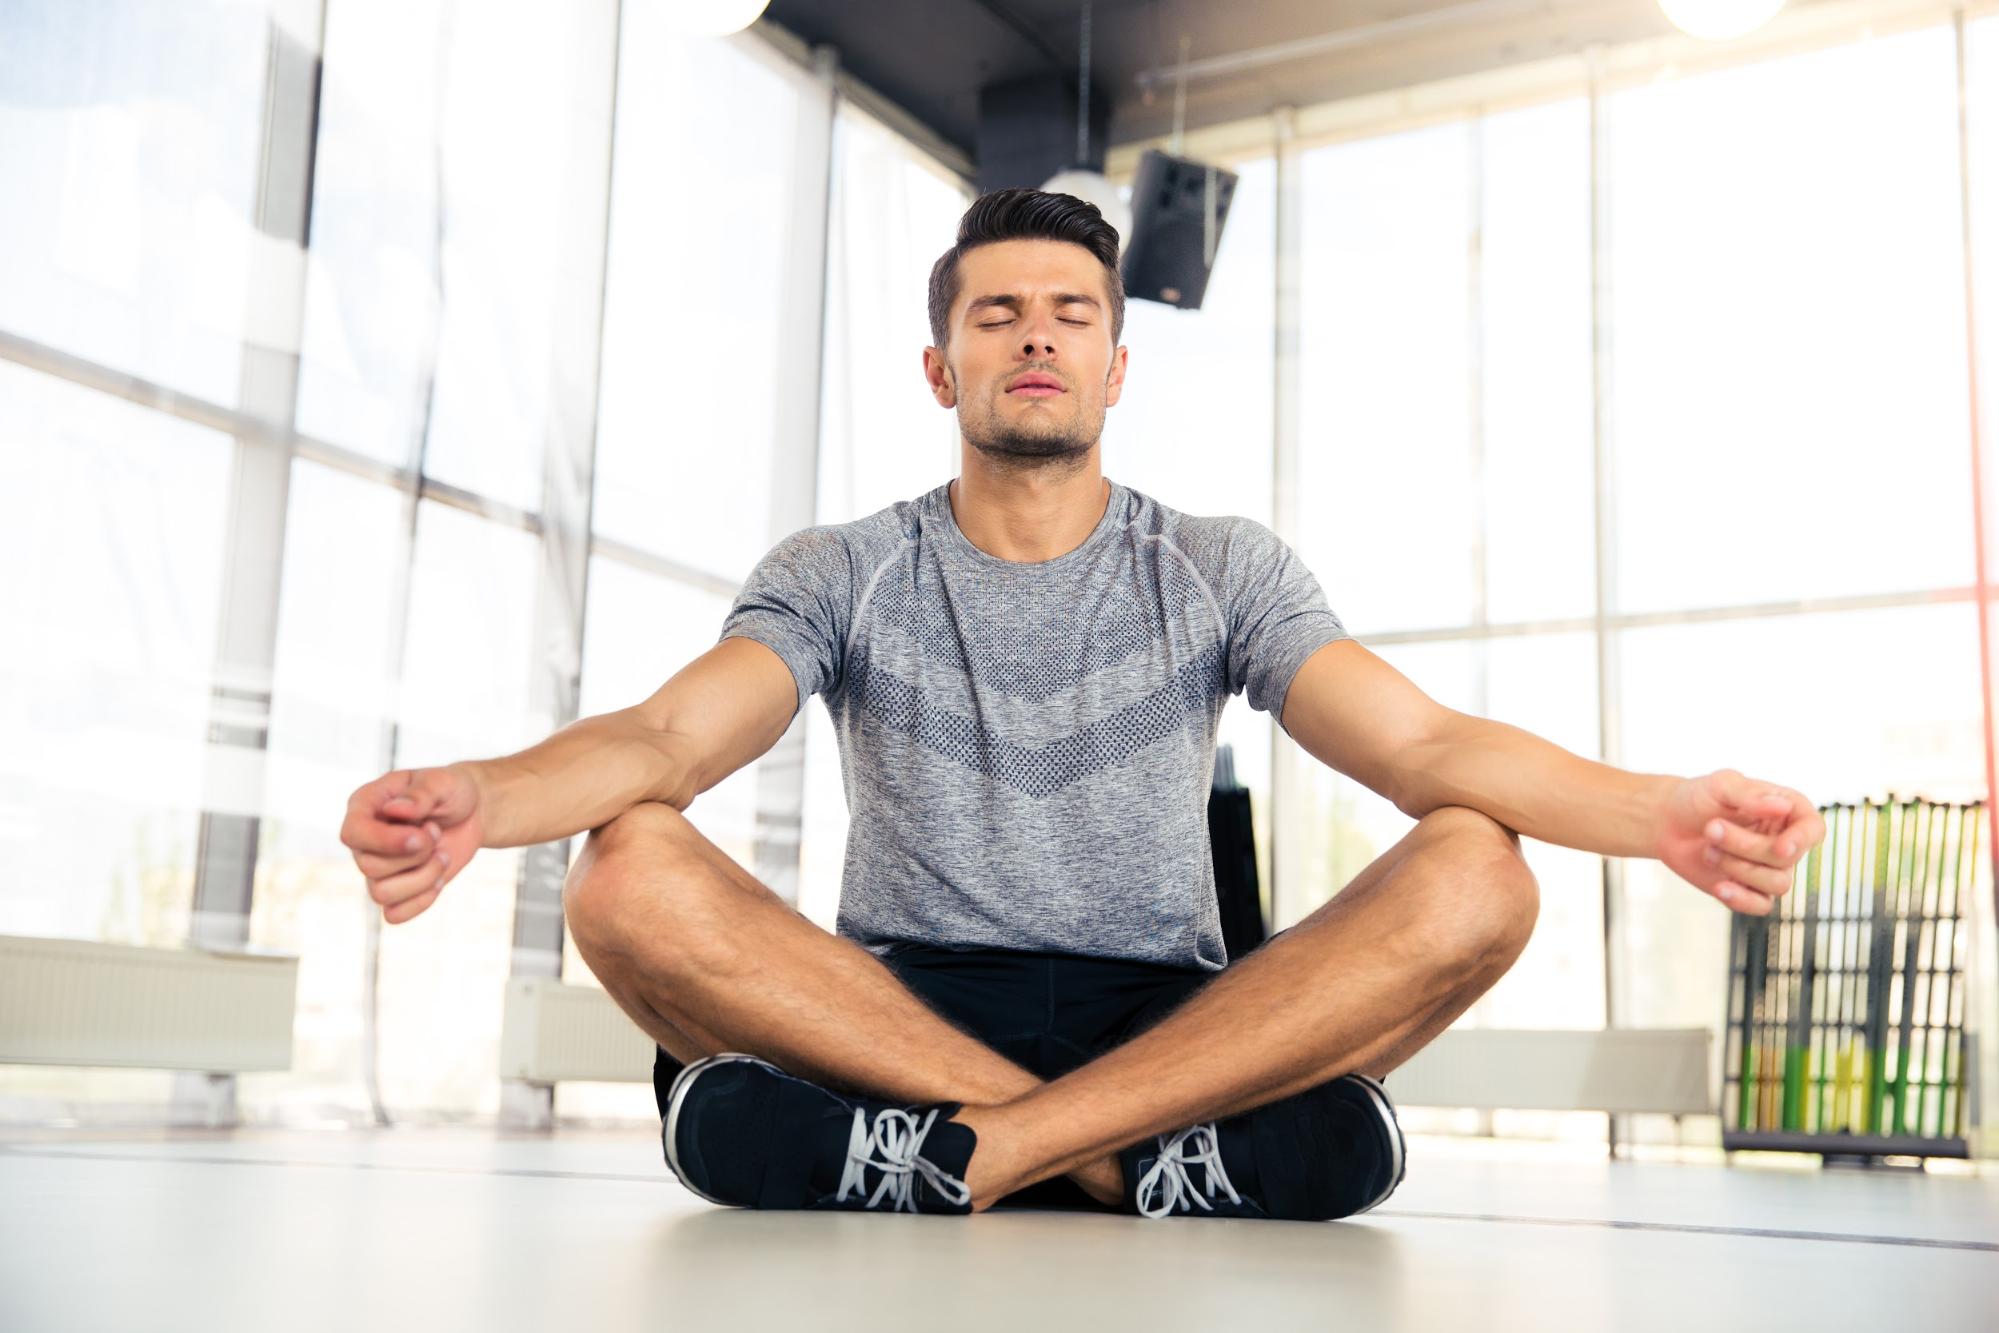 A man meditates as a form of self-care.